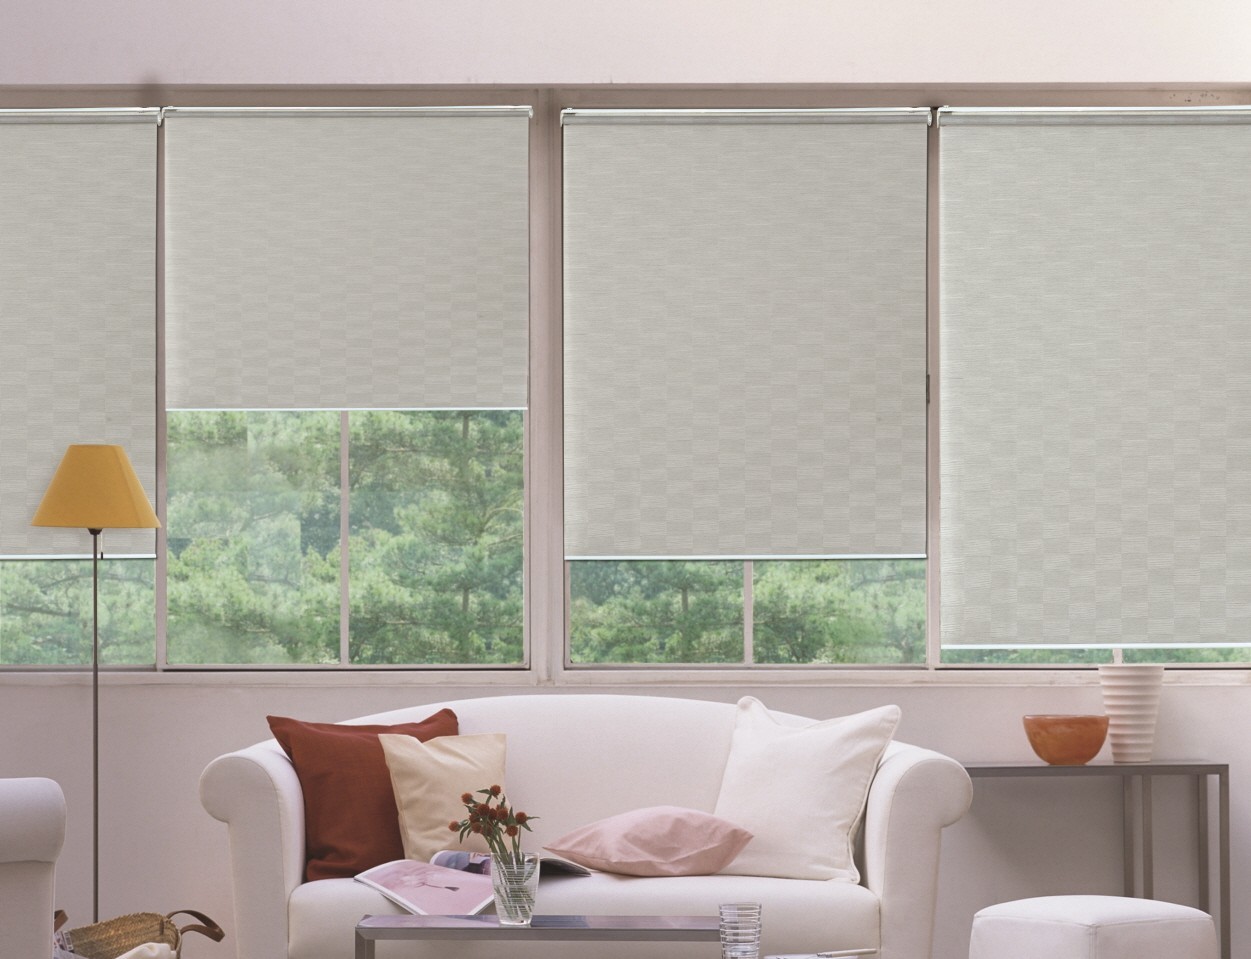 Installing Roller Blinds In Your Home? Here’s What You Need To Know